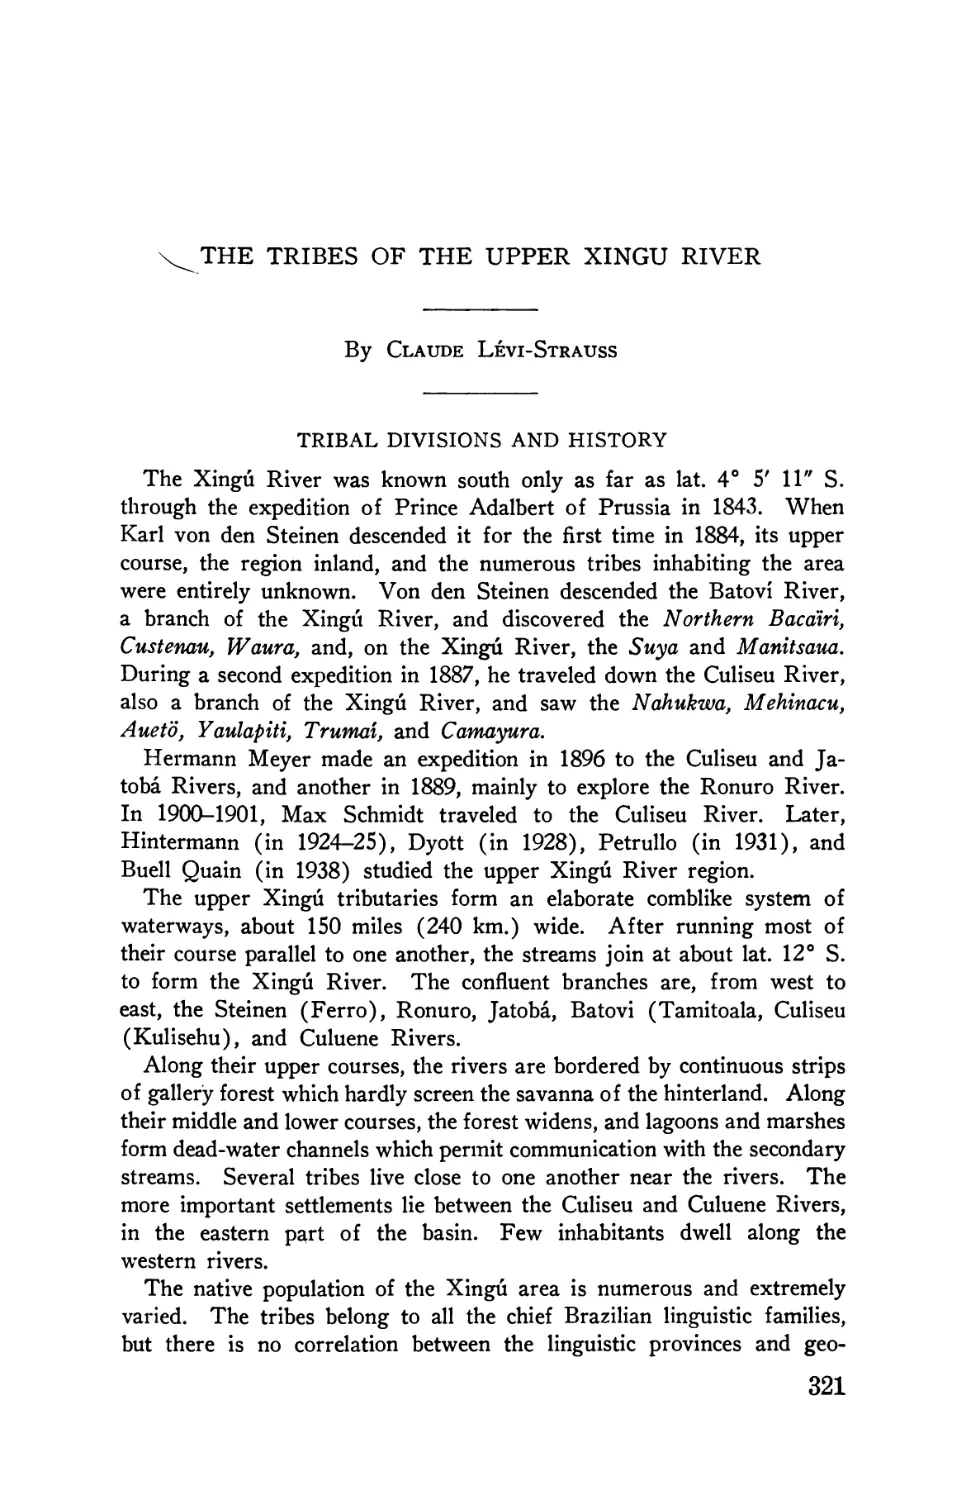 Tribes of the upper Xingú River, by Claud-Lévi-Strauss